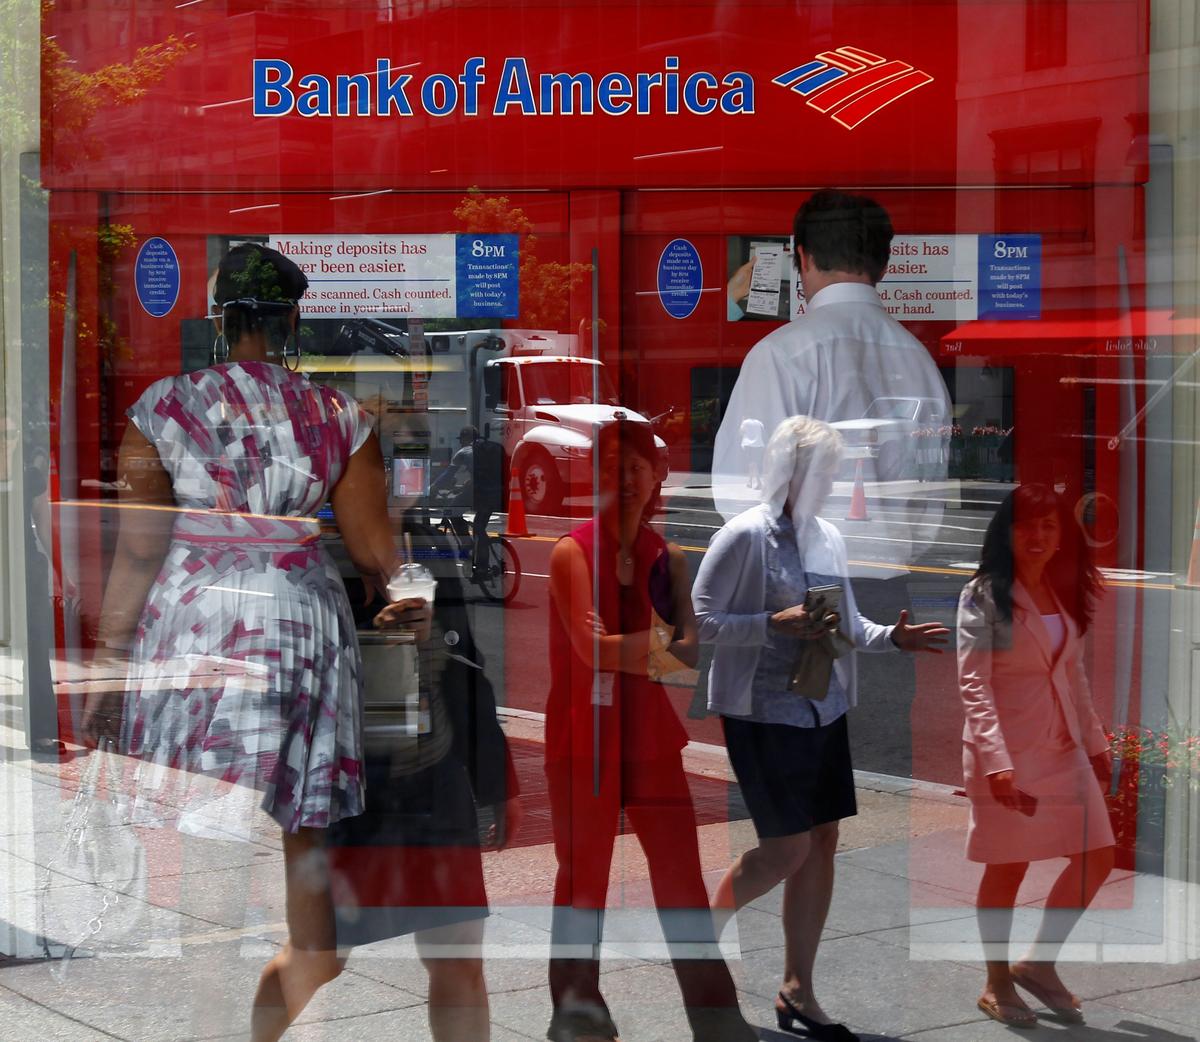 Bored bank customers flock to day-trading platforms during pandemic